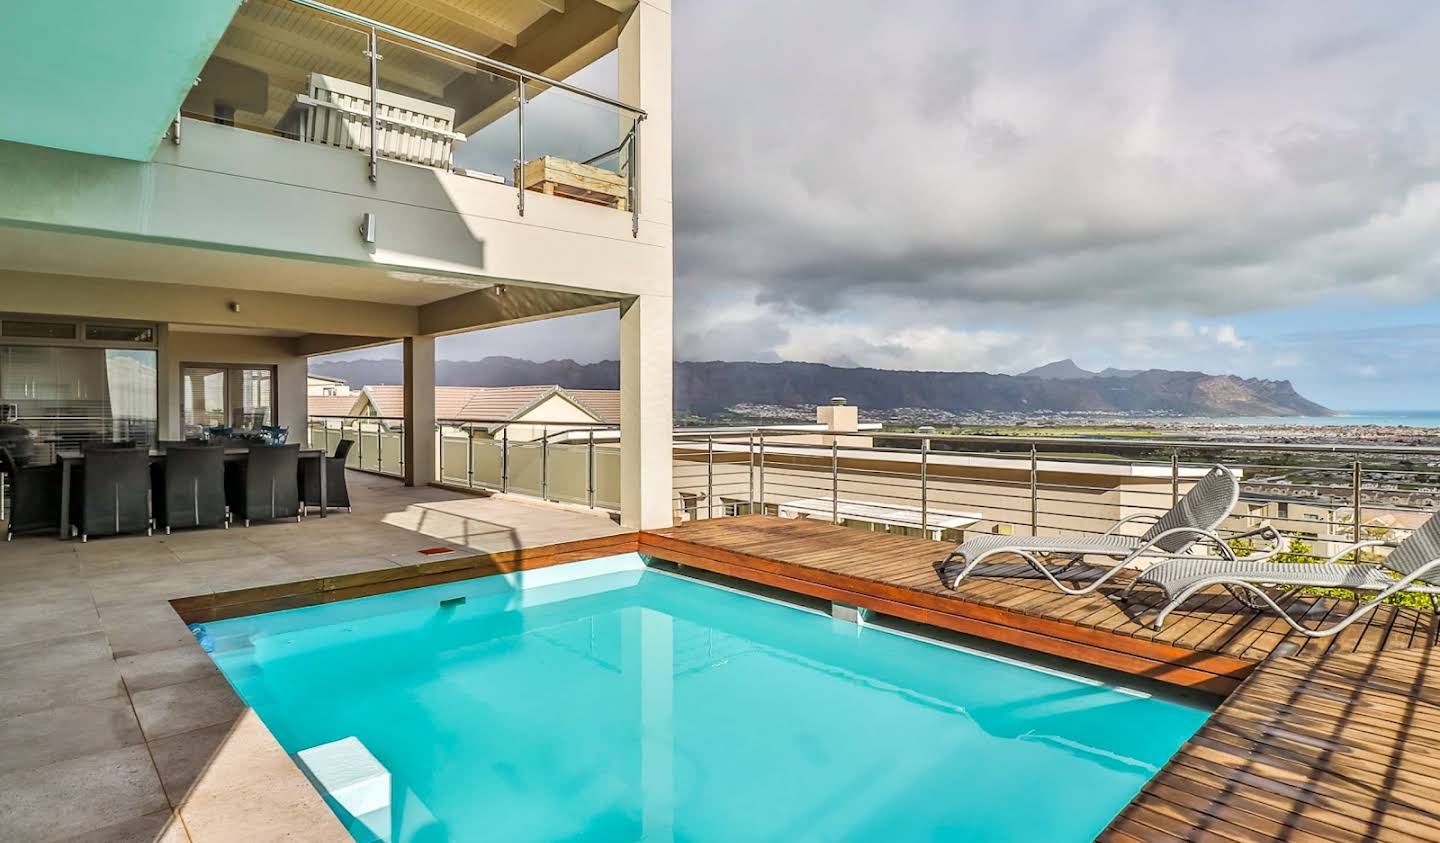 House with pool and terrace Somerset West